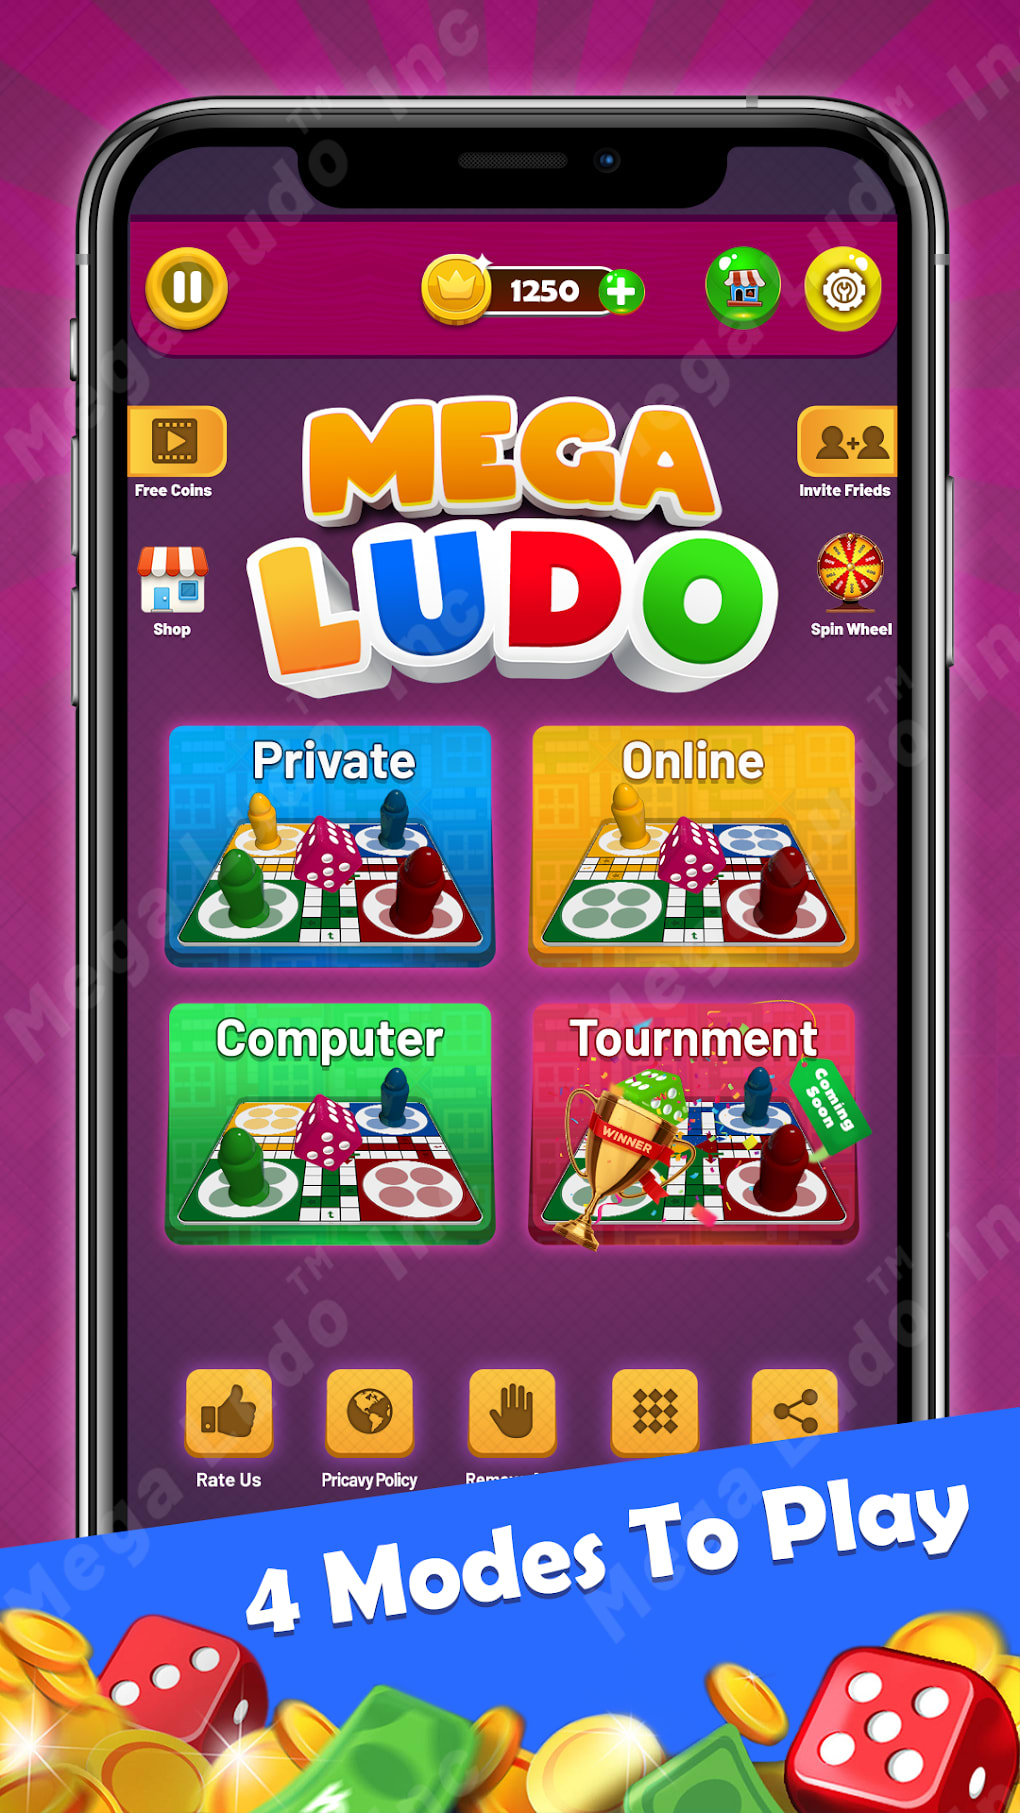 Play real money ludo game online with your friends or with smart computer  which is waiting for you. For Download: http…